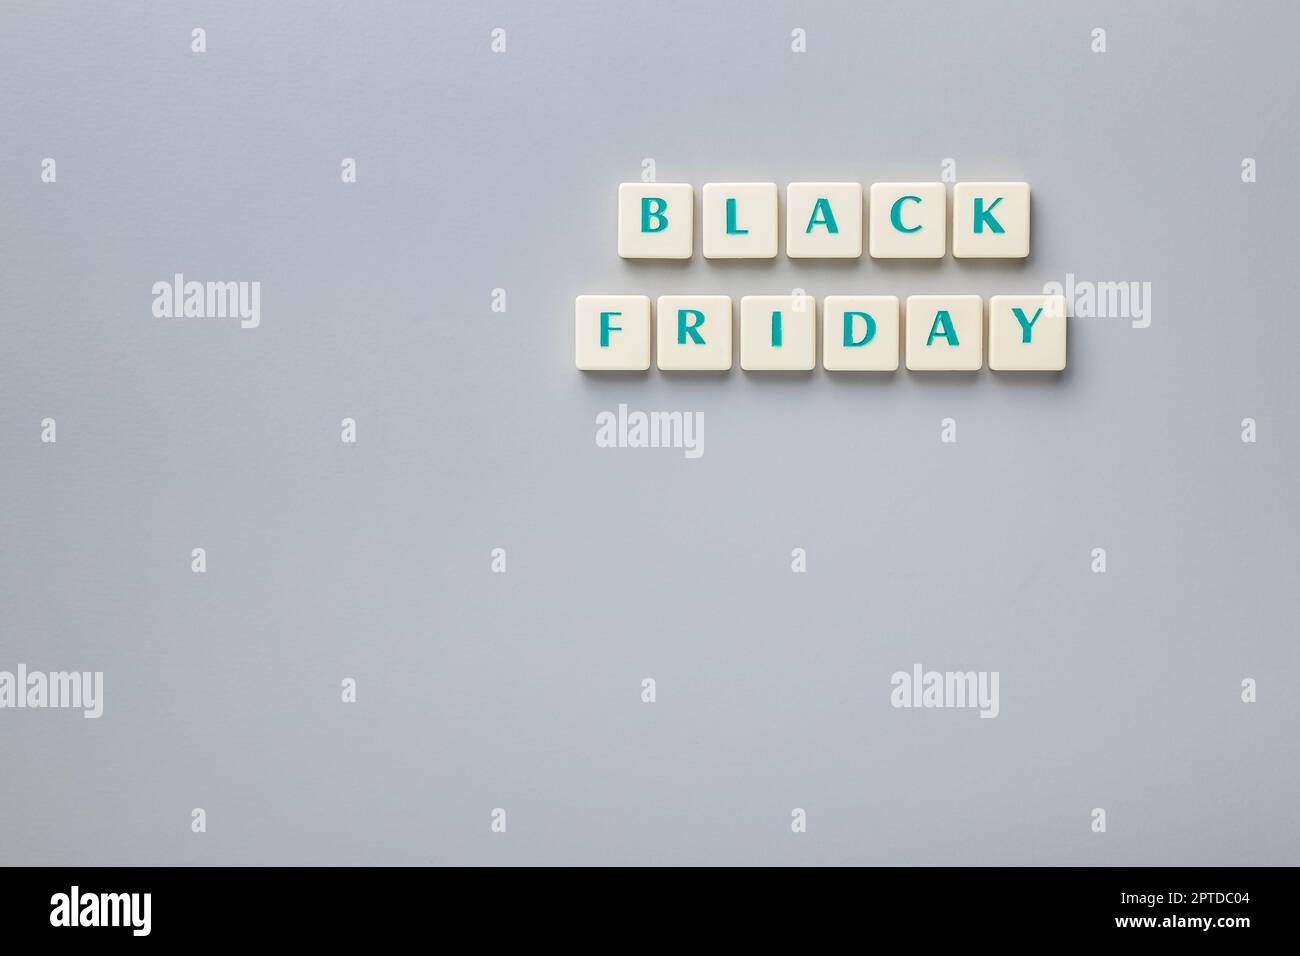 Black friday text on the gray background. Top view. Stock Photo